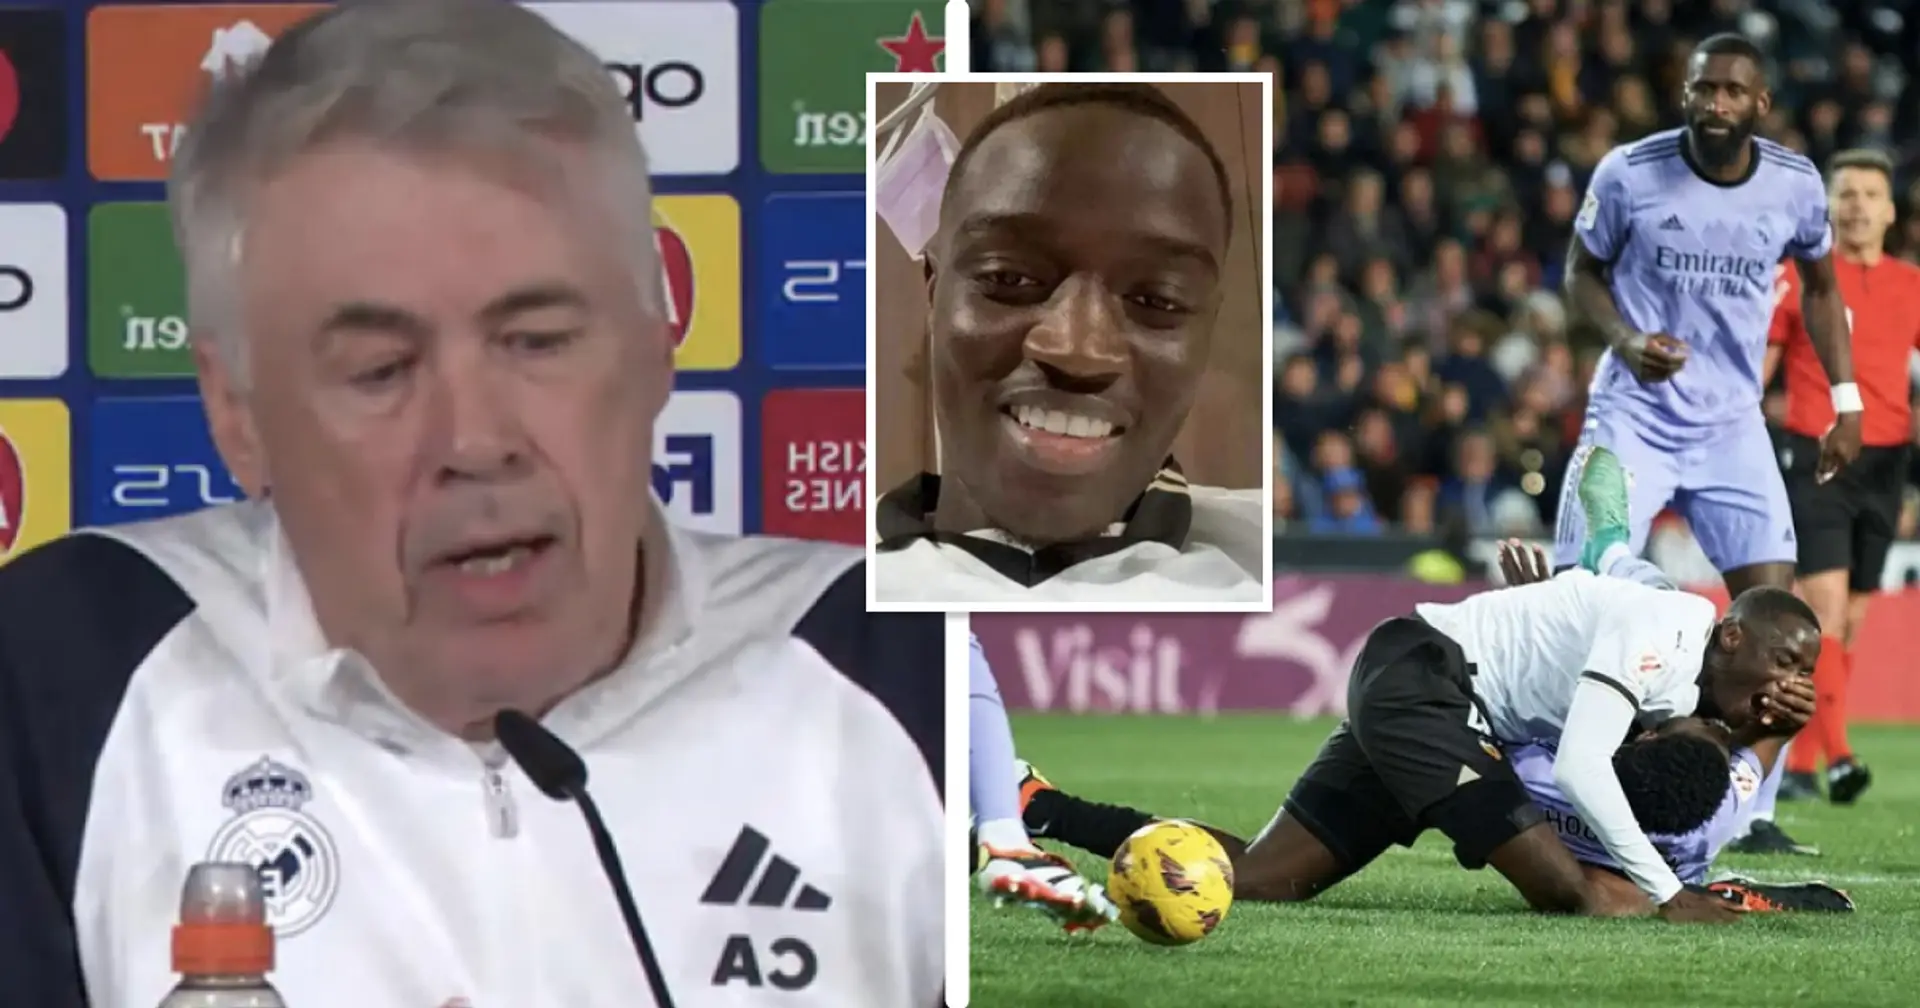 Carlo Ancelotti reveals Real Madrid's lovely gesture for Mouctar Diakhaby who suffered terrible injury